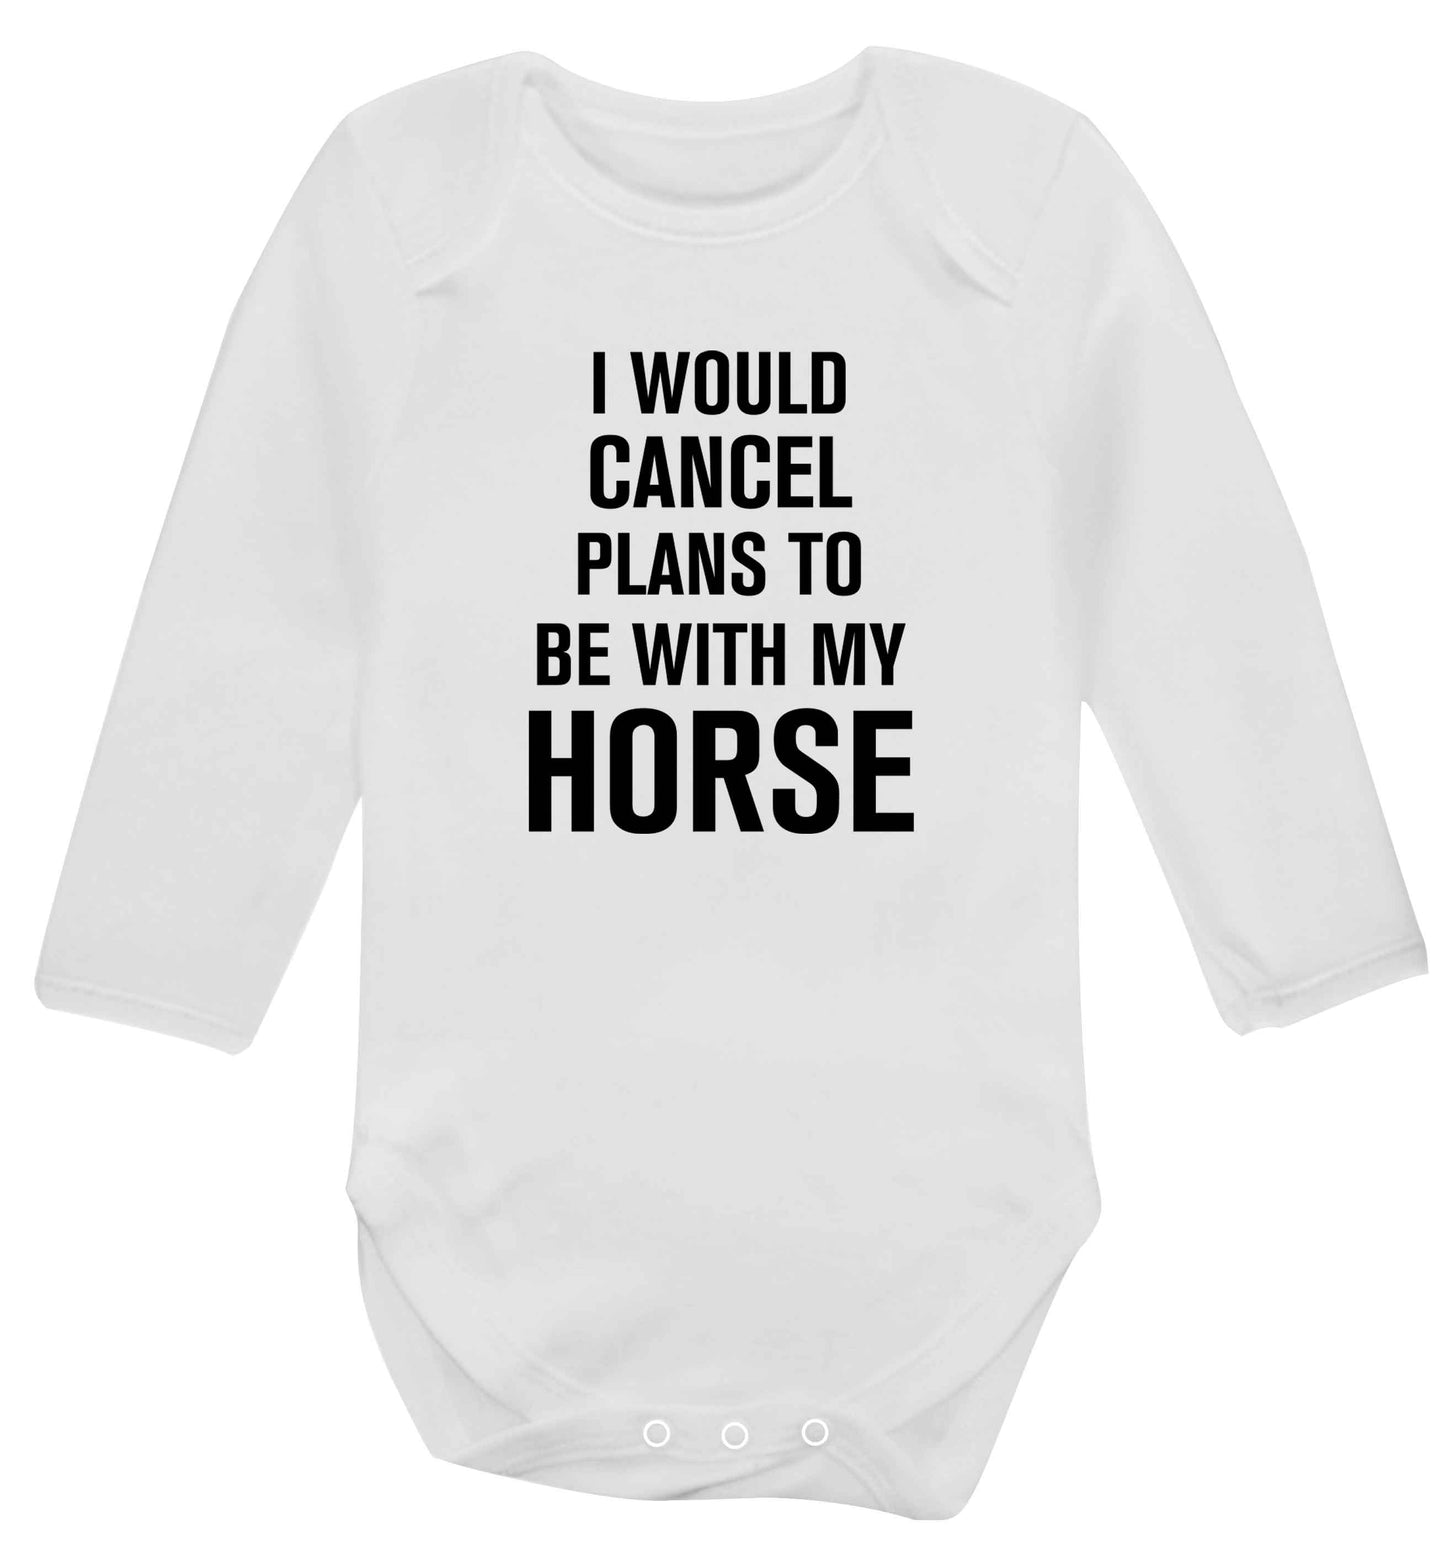 I will cancel plans to be with my horse baby vest long sleeved white 6-12 months